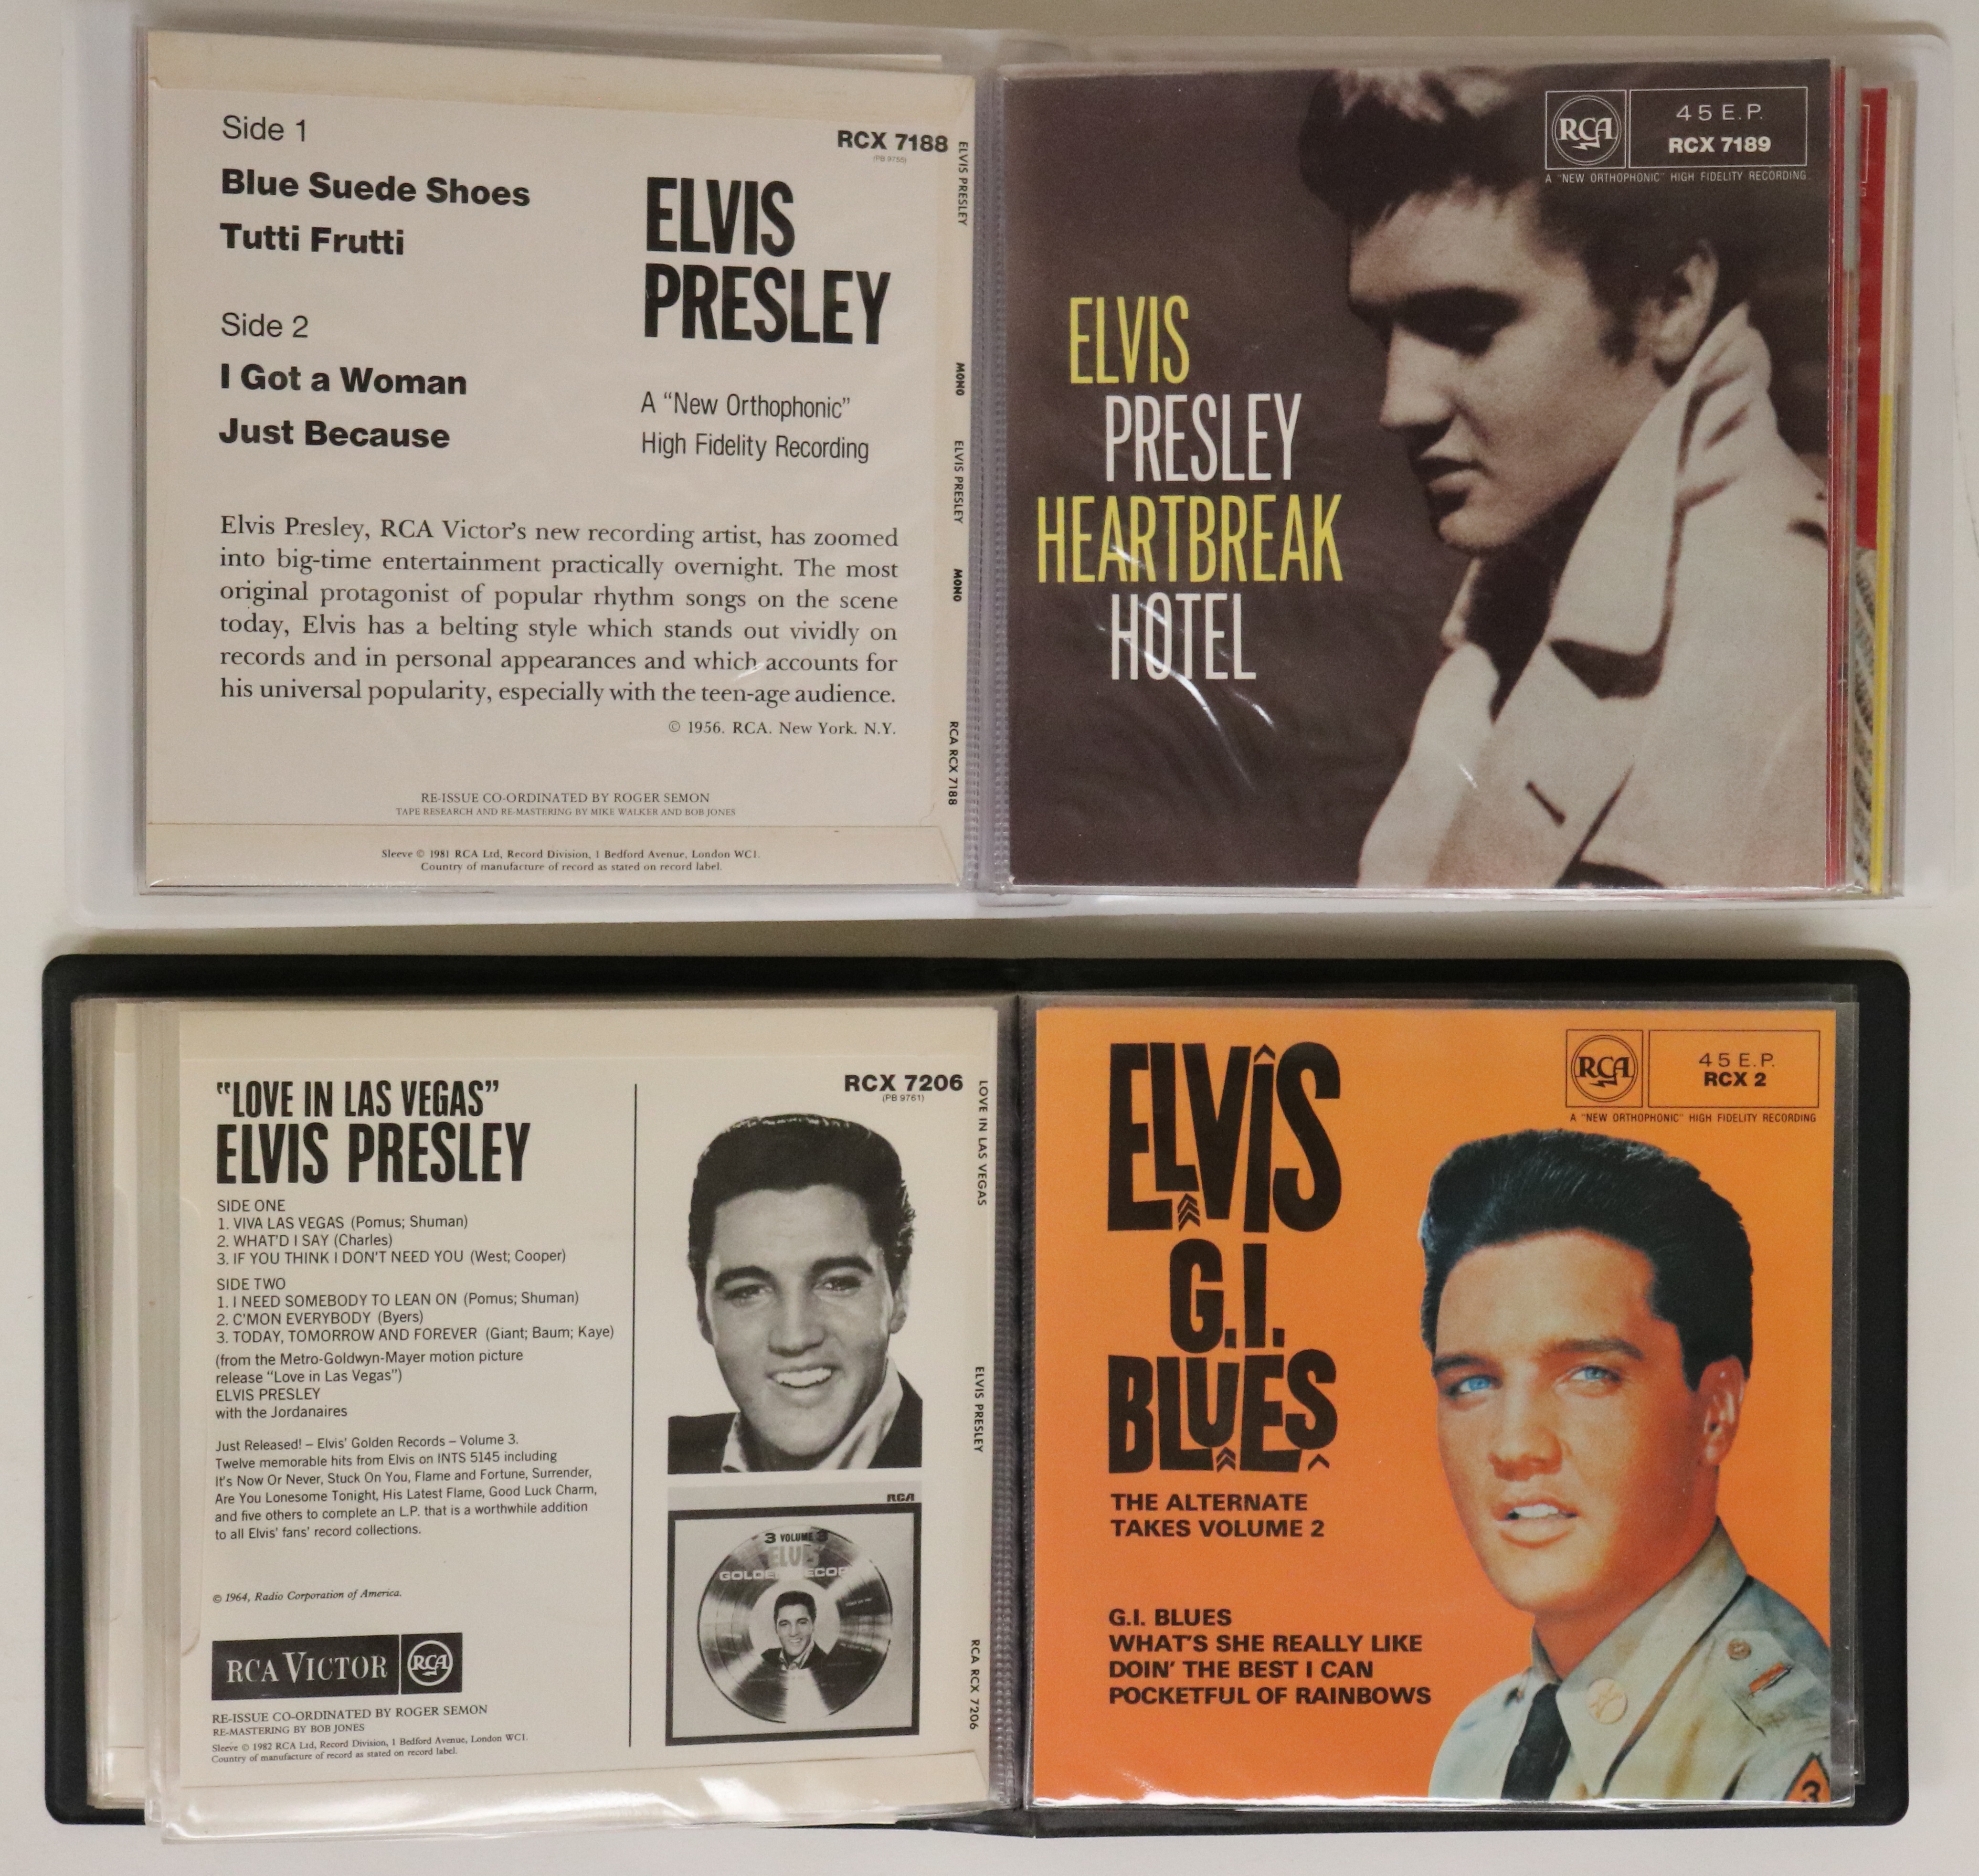 ELVIS PRESLEY - THE E.P. COLLECTION ALBUMS - BOX SETS. - Image 5 of 5